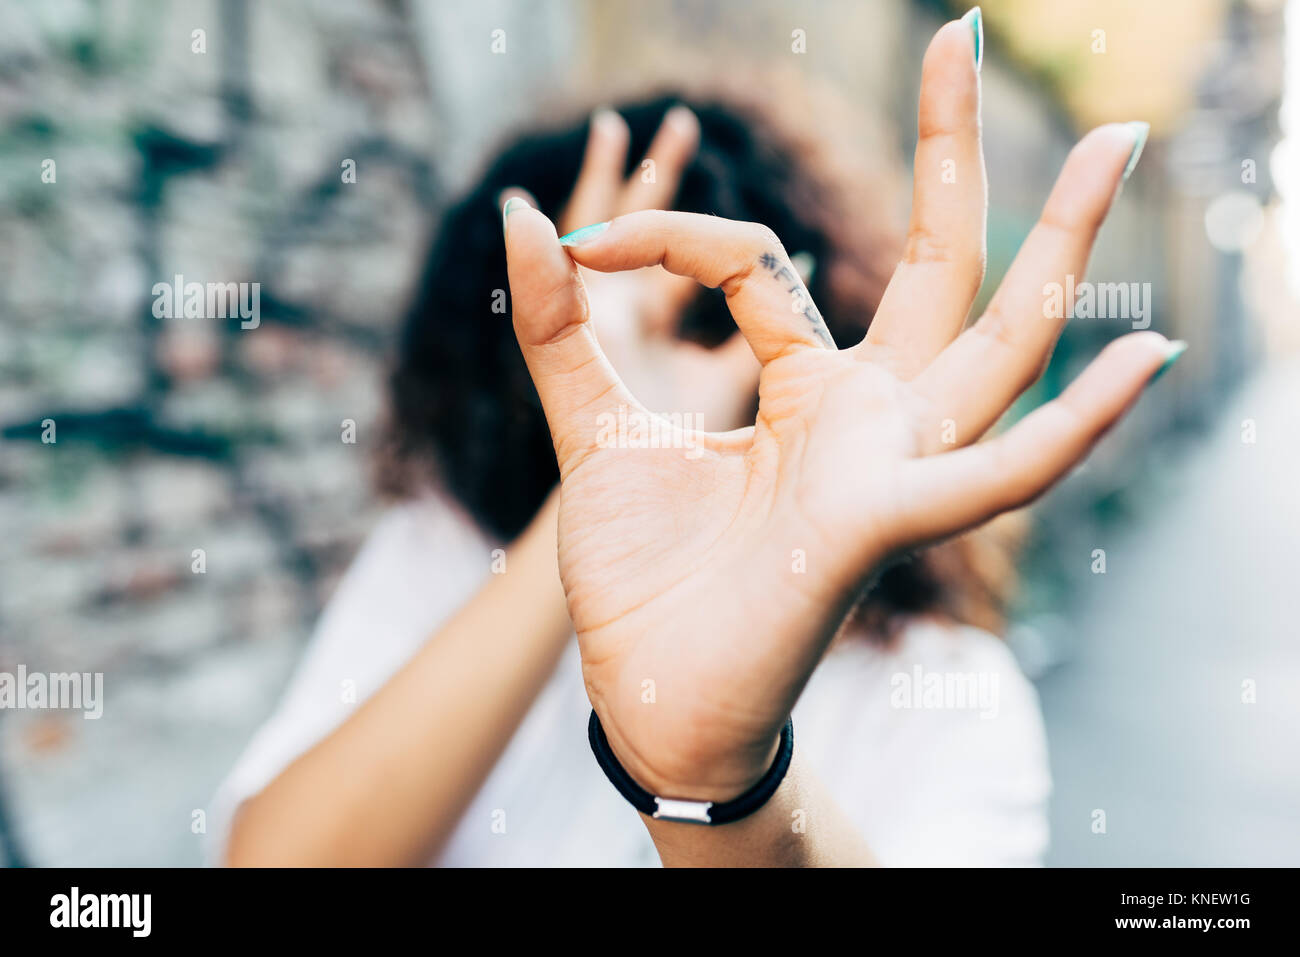 Woman making hand gestures, Milan, Italy Stock Photo